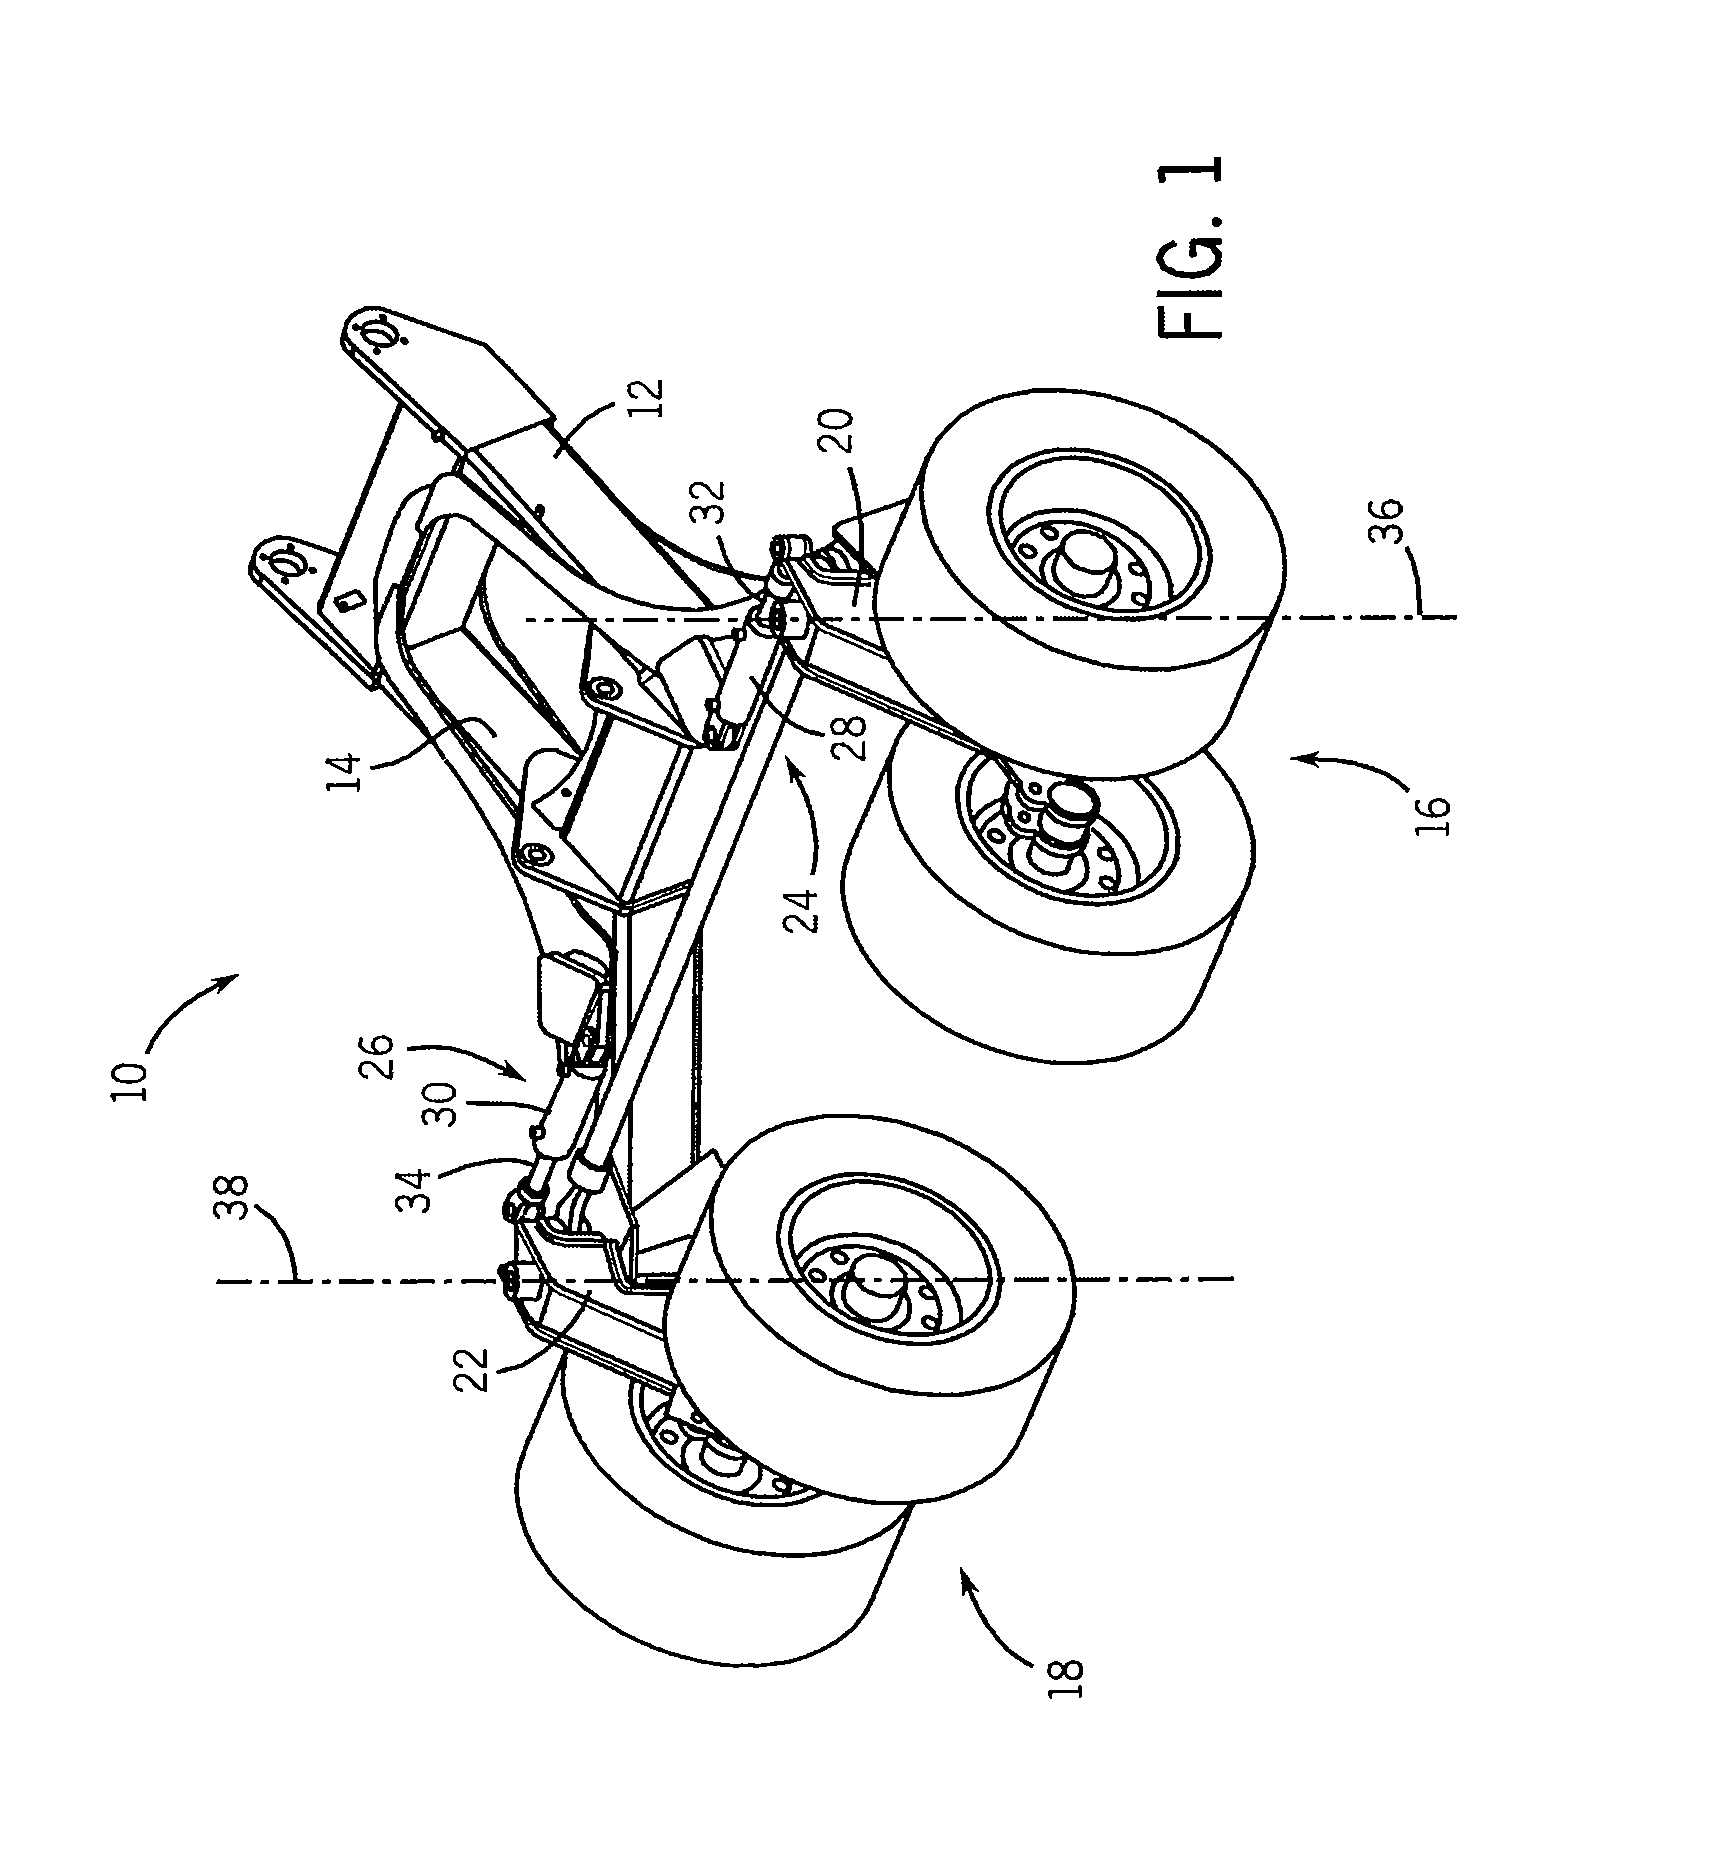 Method For Speed Based Control Of An Implement Steering System